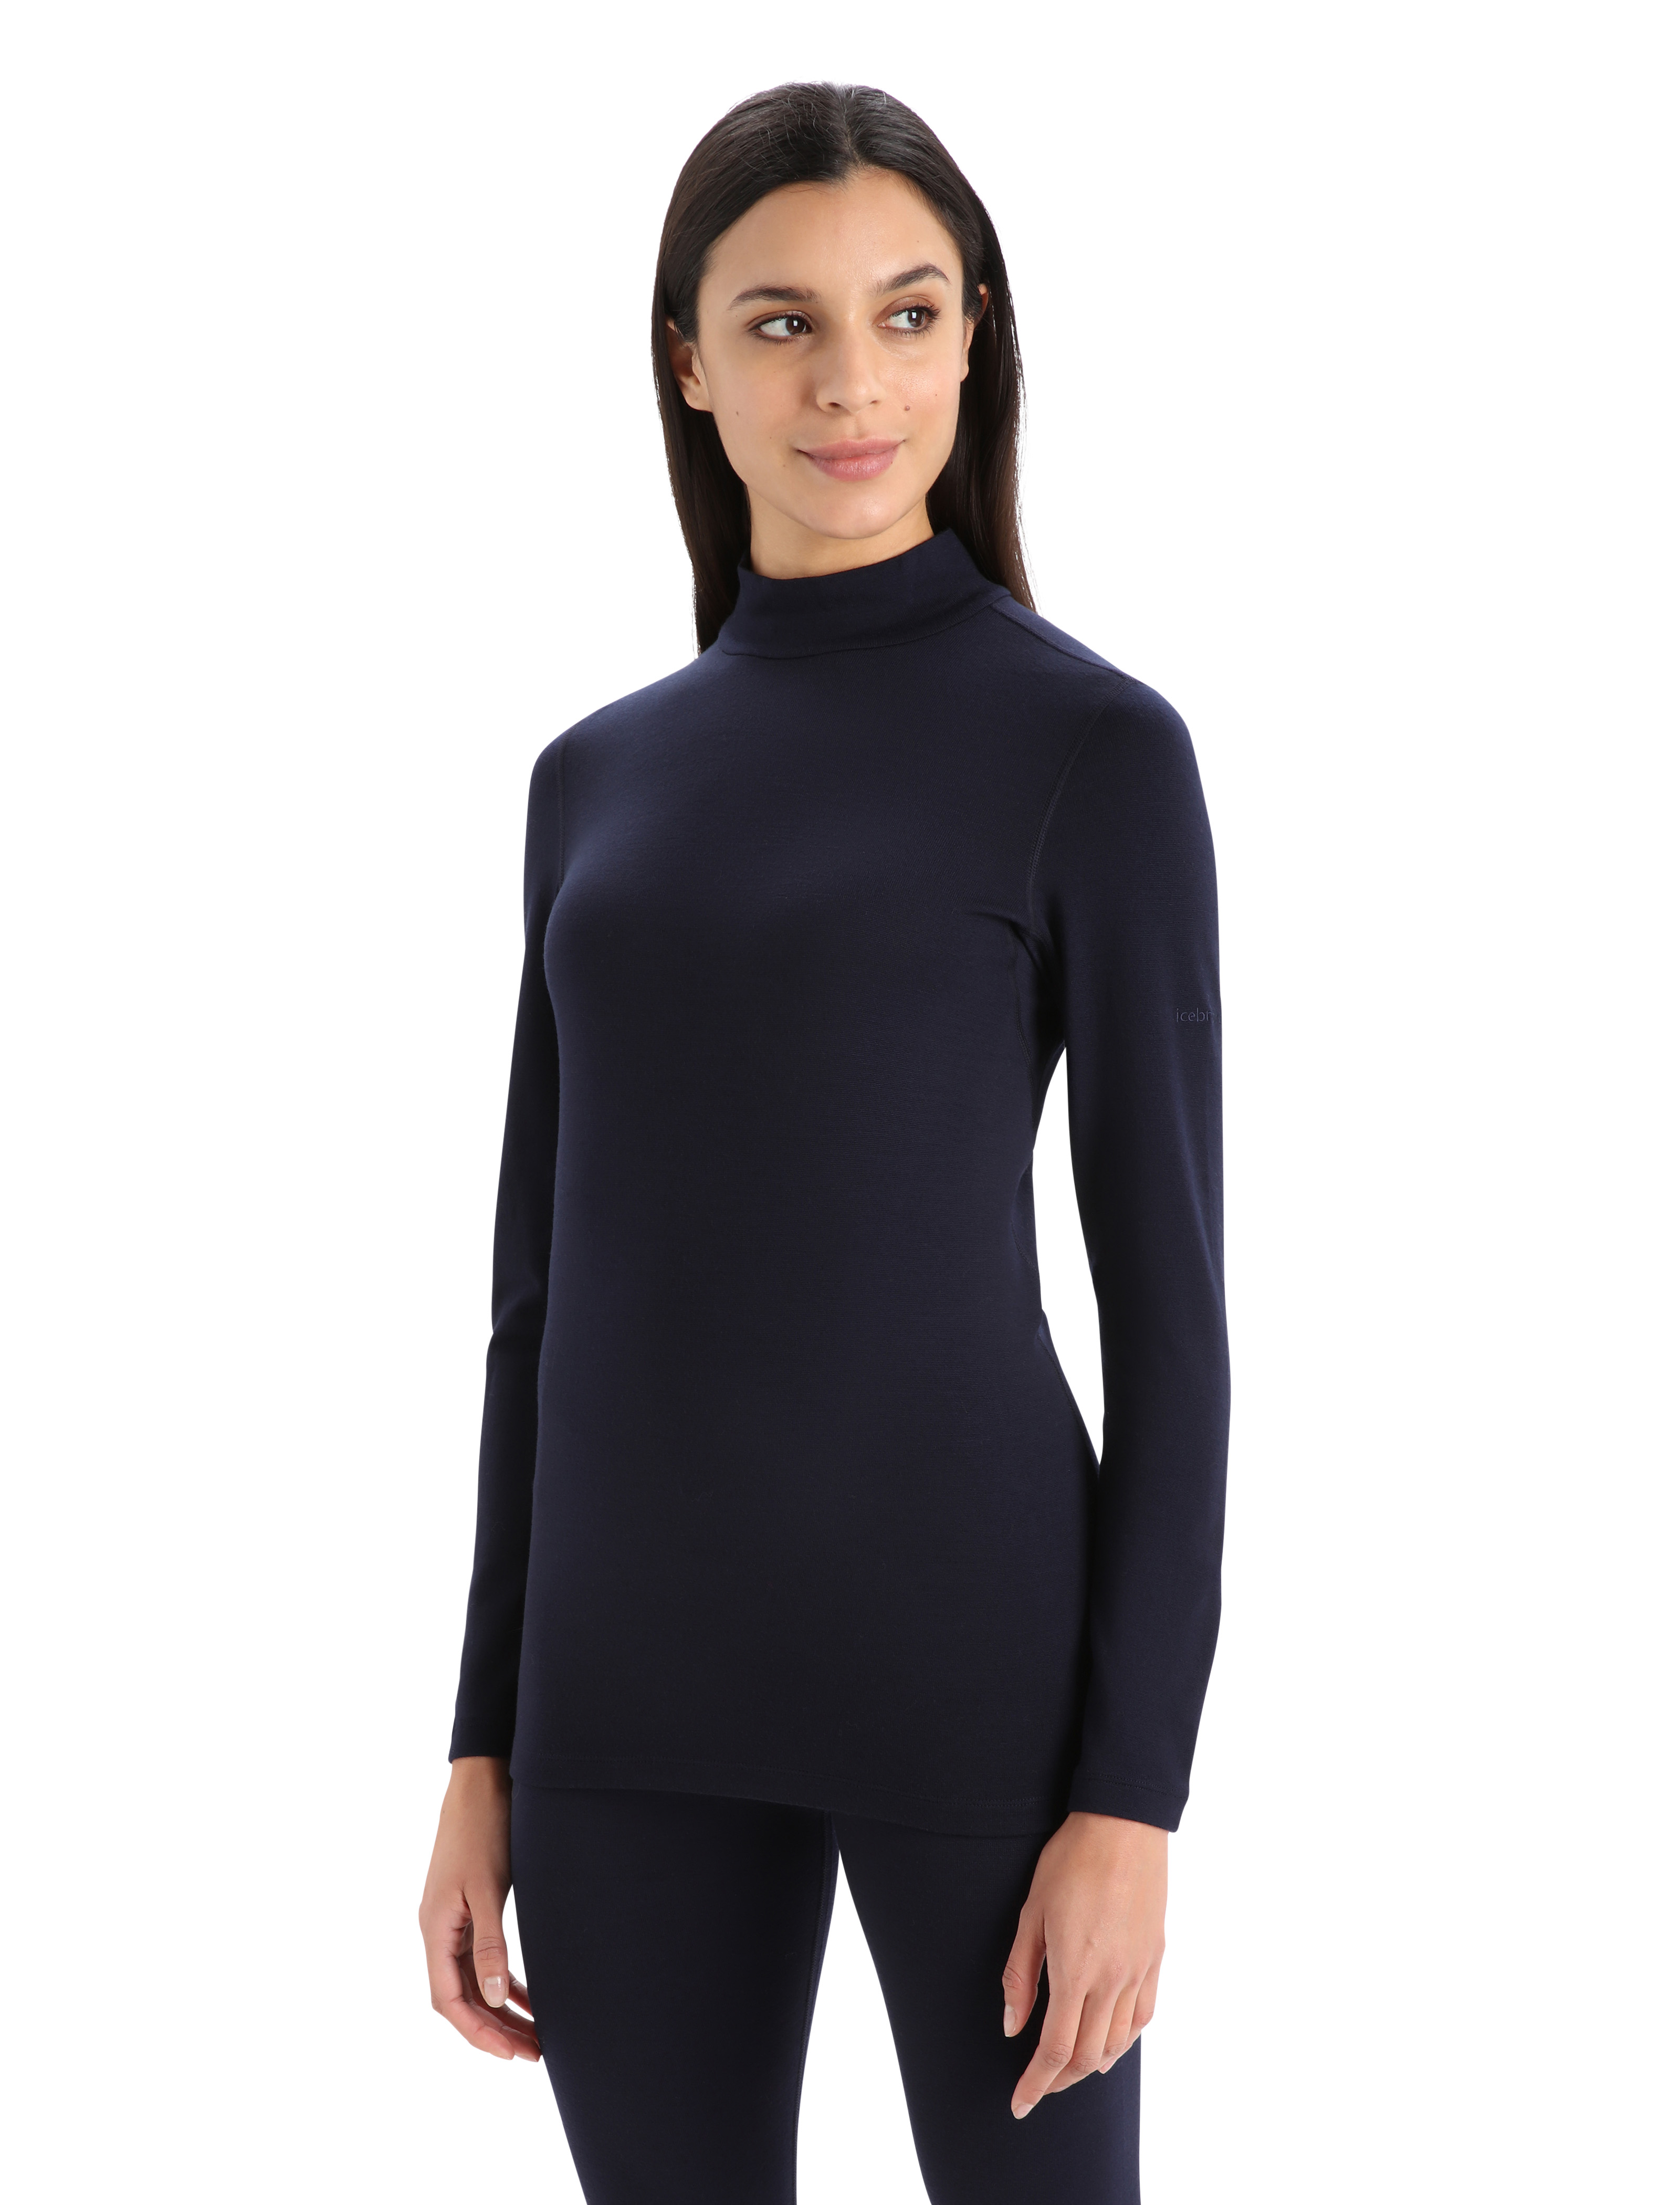 EXCELLENT THERMAL Womens Mock Turtleneck Tops Long Sleeve Shirts